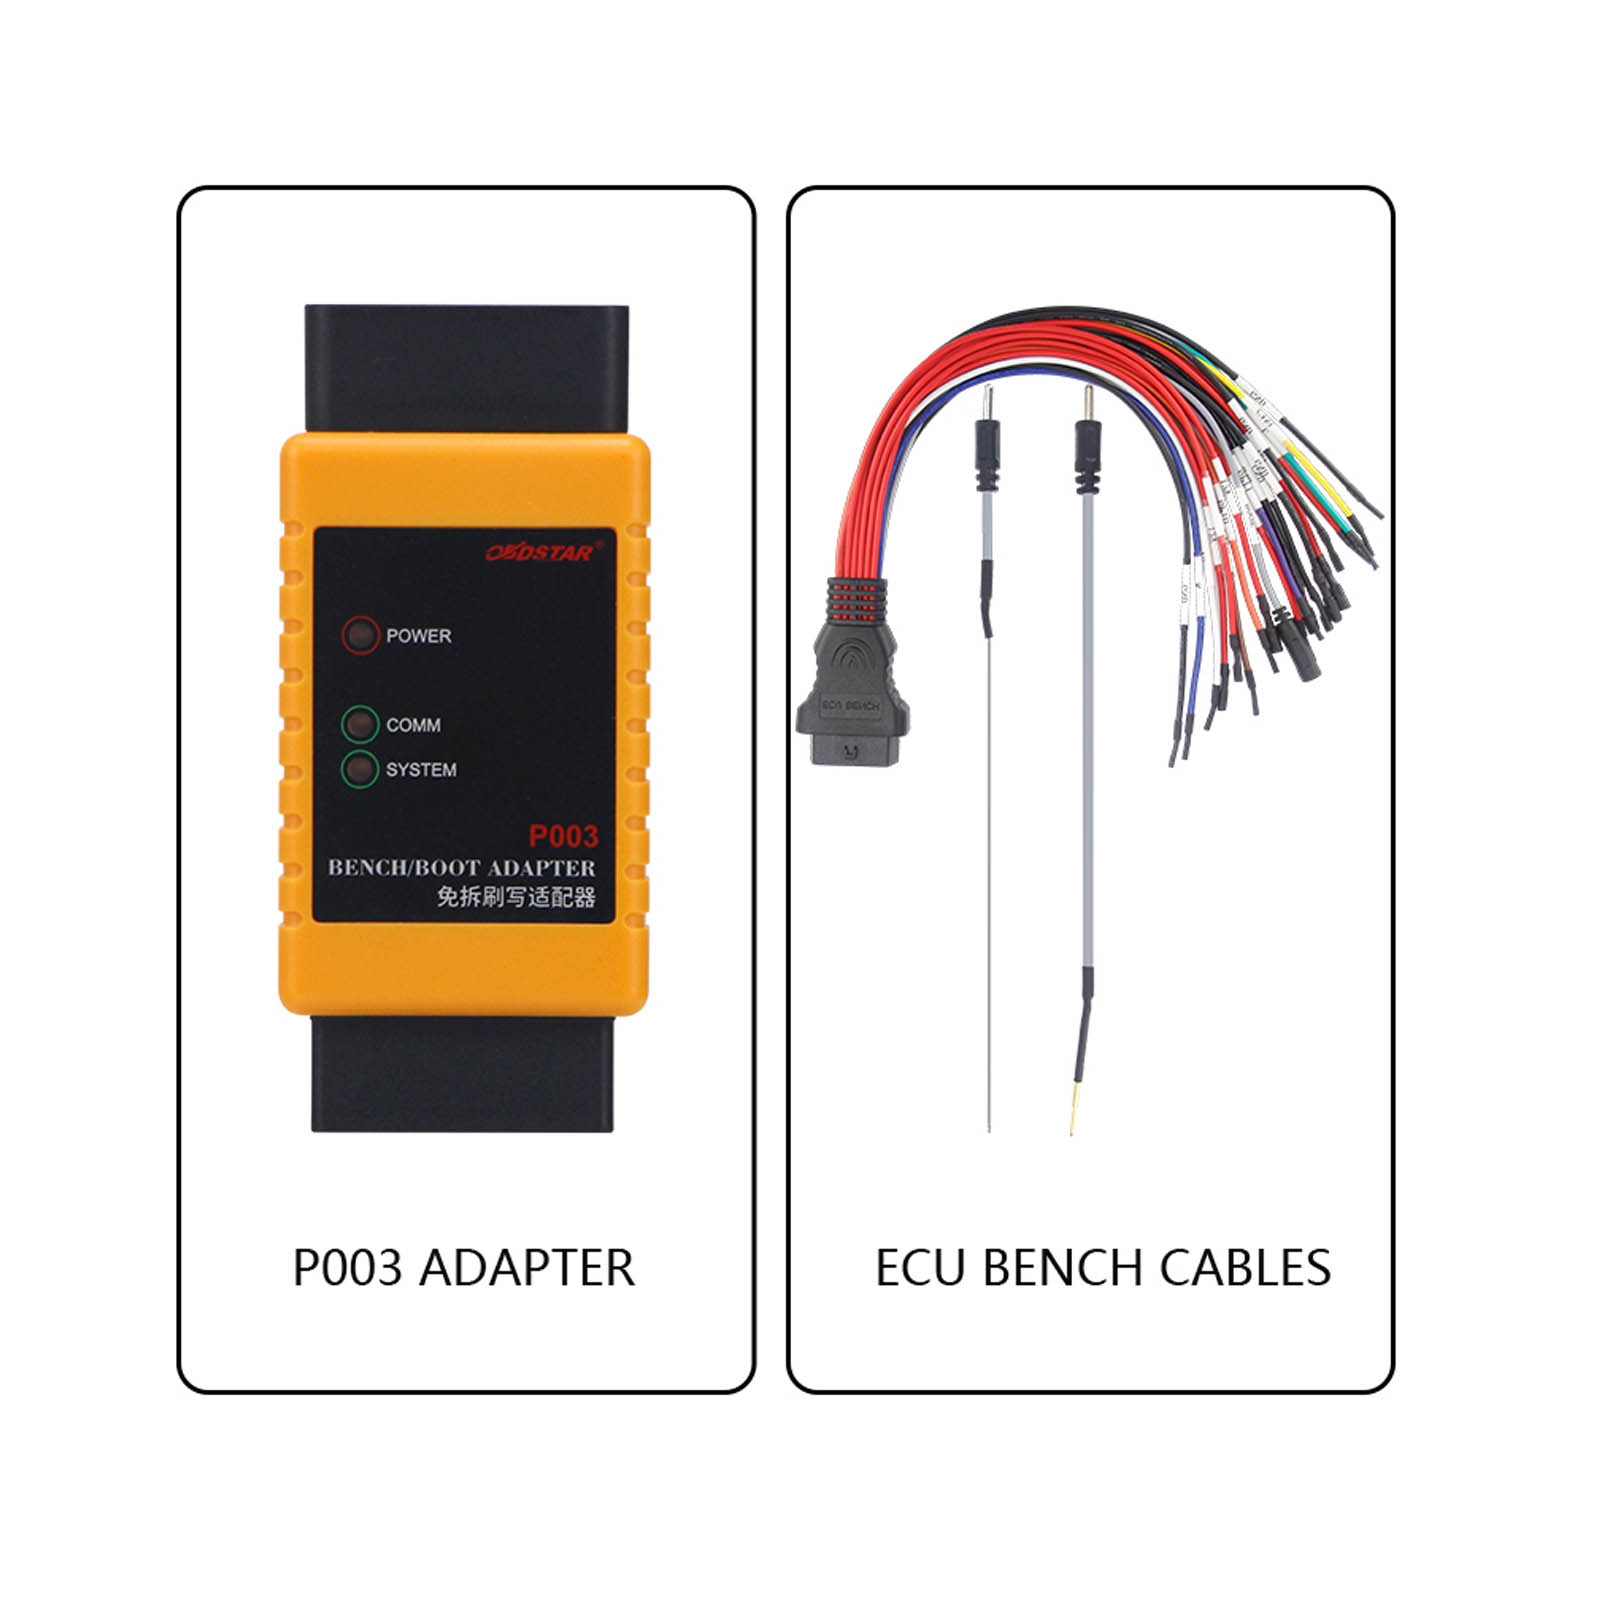 OBDSTAR P003 Bench/Boot Adapter Kit for ECU CS PIN Reading with OBDSTAR IMMO Series Tablets X300 DP X300 Pro4 X300 DP Plus